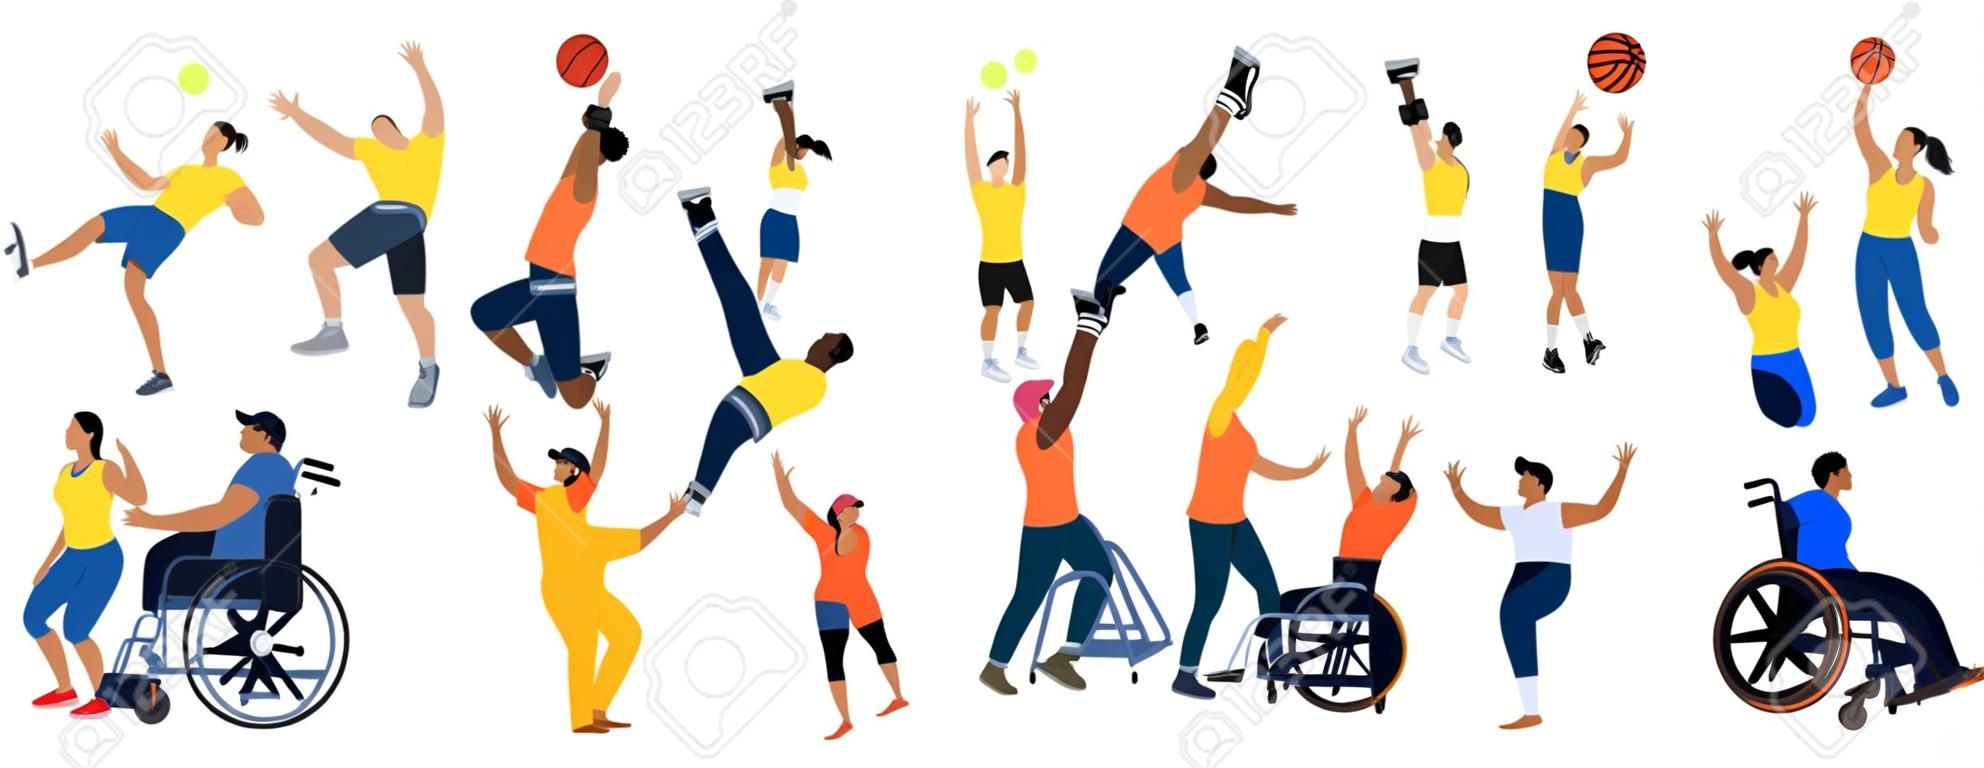 Set of diverse sport people with disabilities.